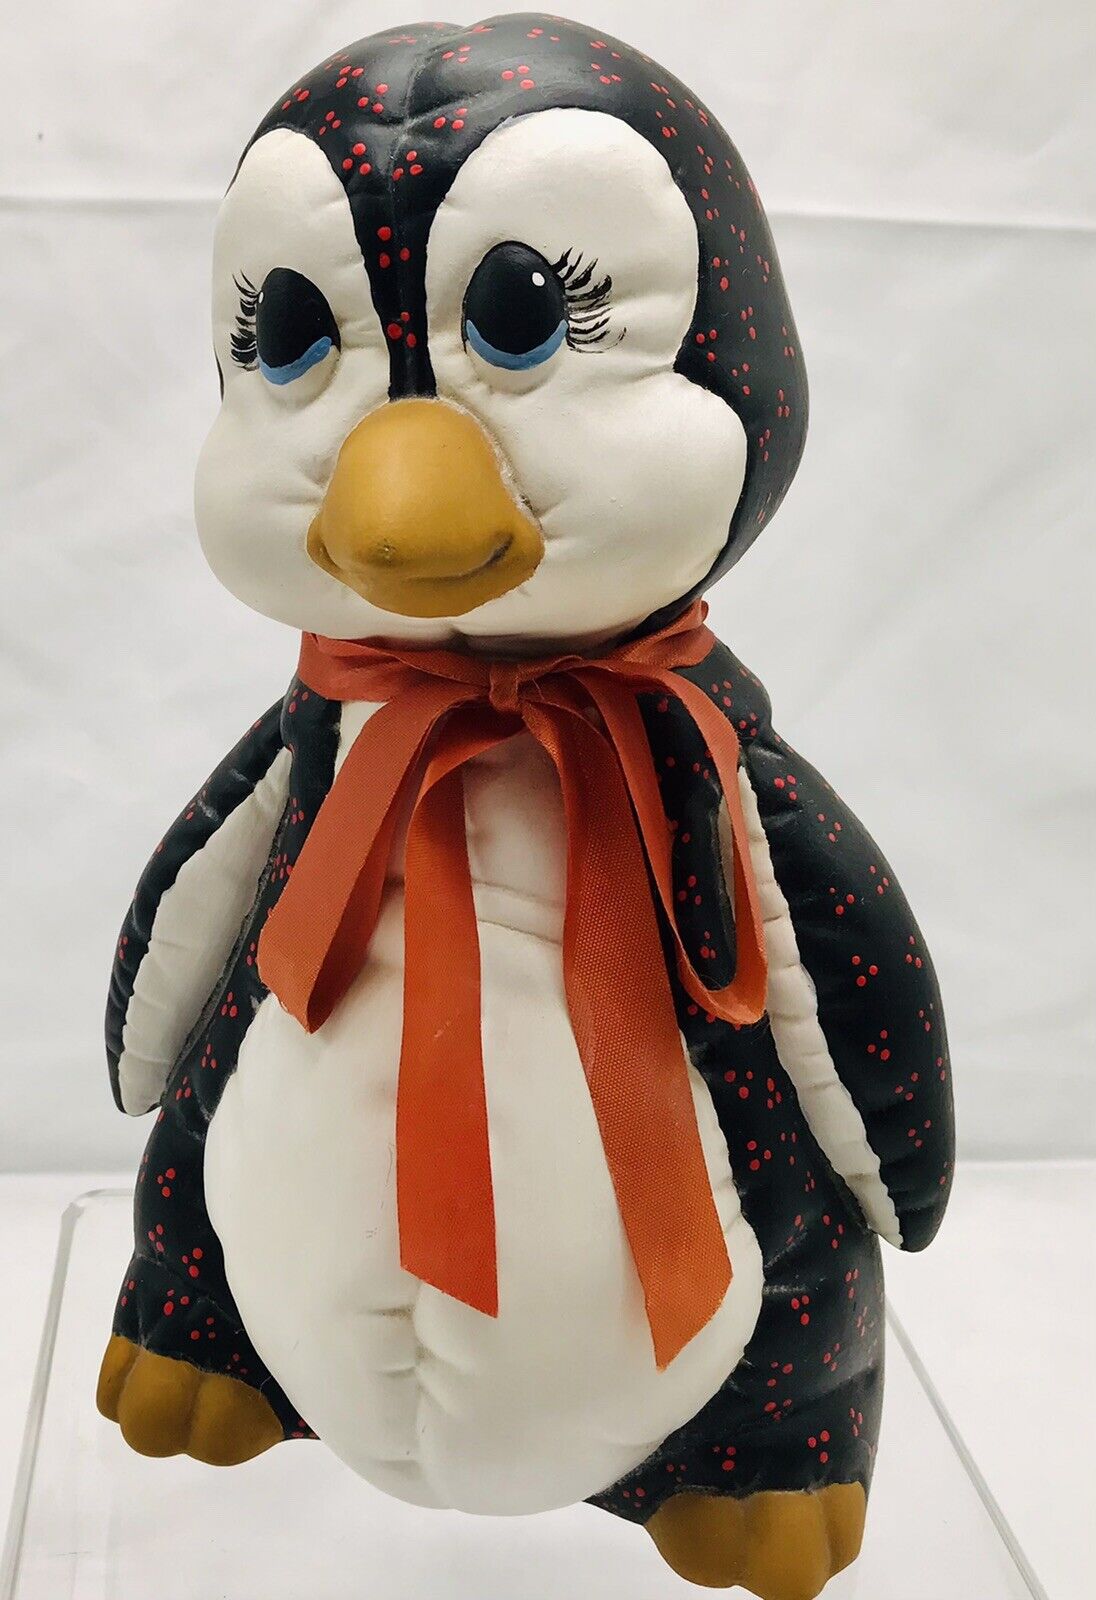 1980's Kimple Mold Ceramic Hand-painted Adorable Penguin Figurine With Bow